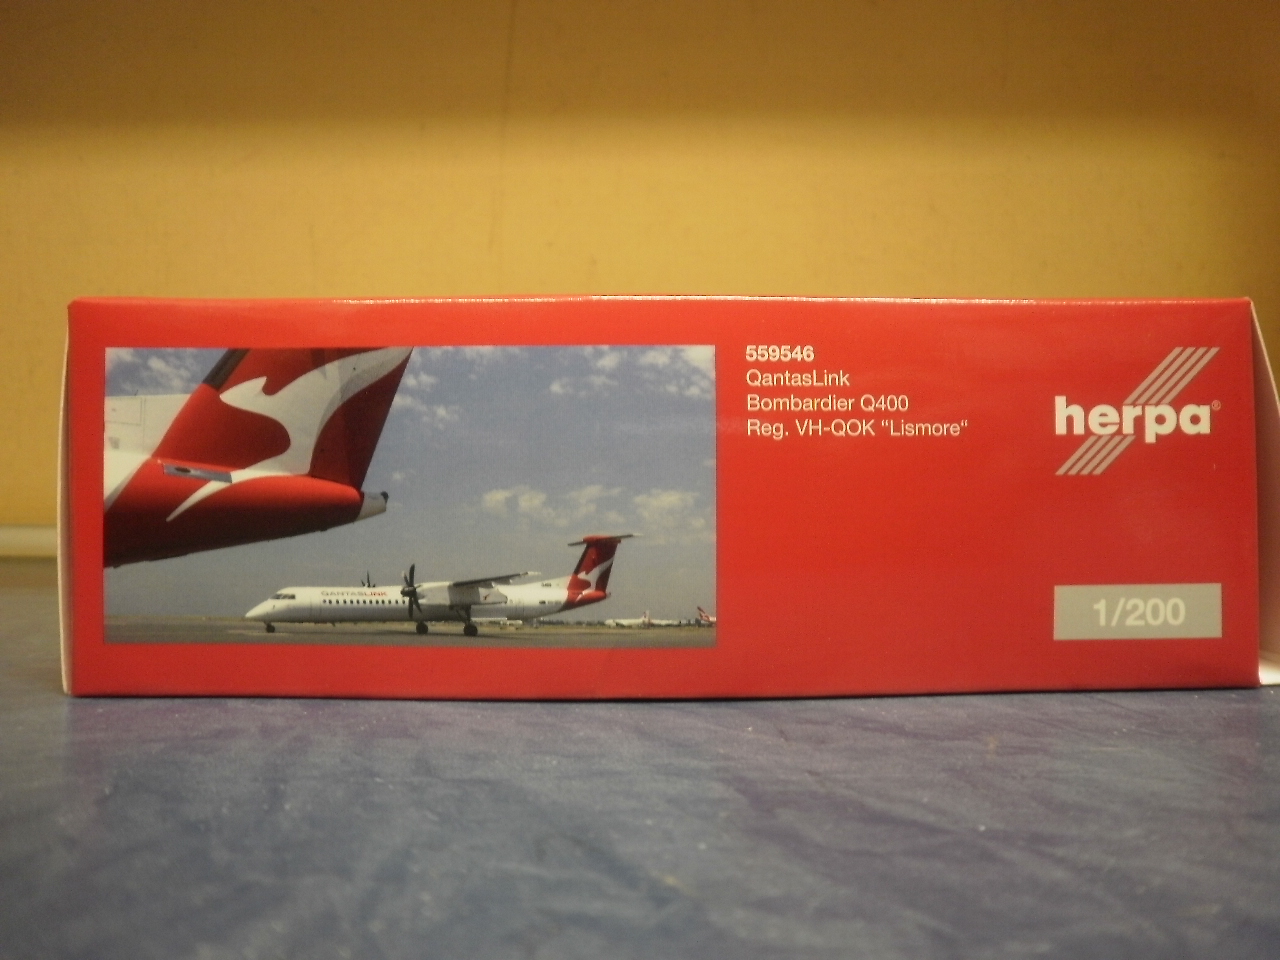 Ds Automodelle Modellbauvertrieb Herpa Wings 1 200 Bombardier Q400 Qantas Link 559546 Online Kaufen